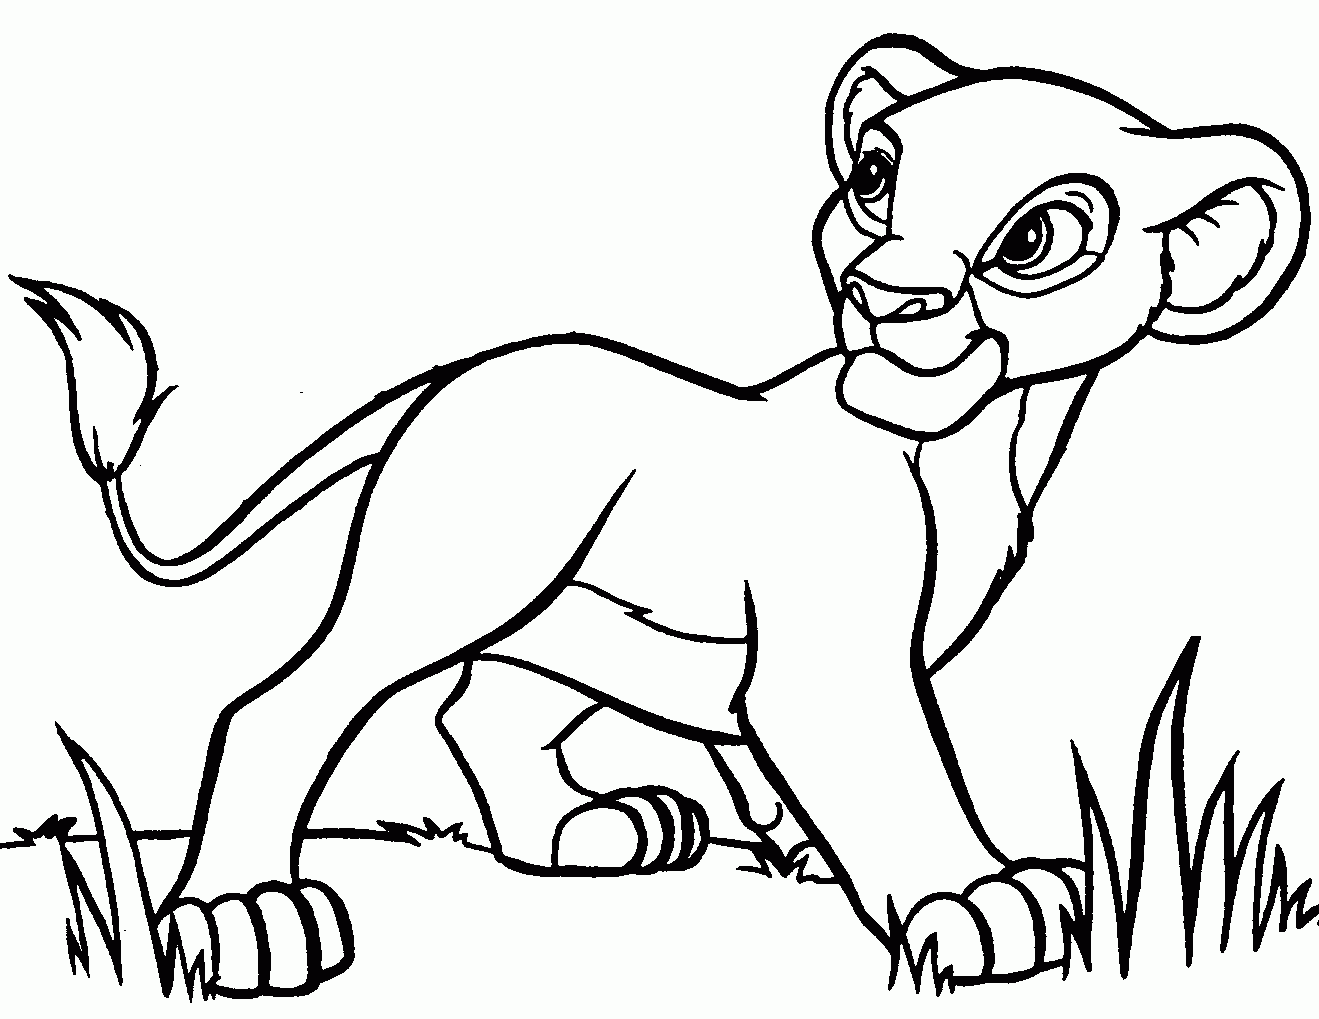 Coloring Pages Disney Cartoon Characters - Coloring